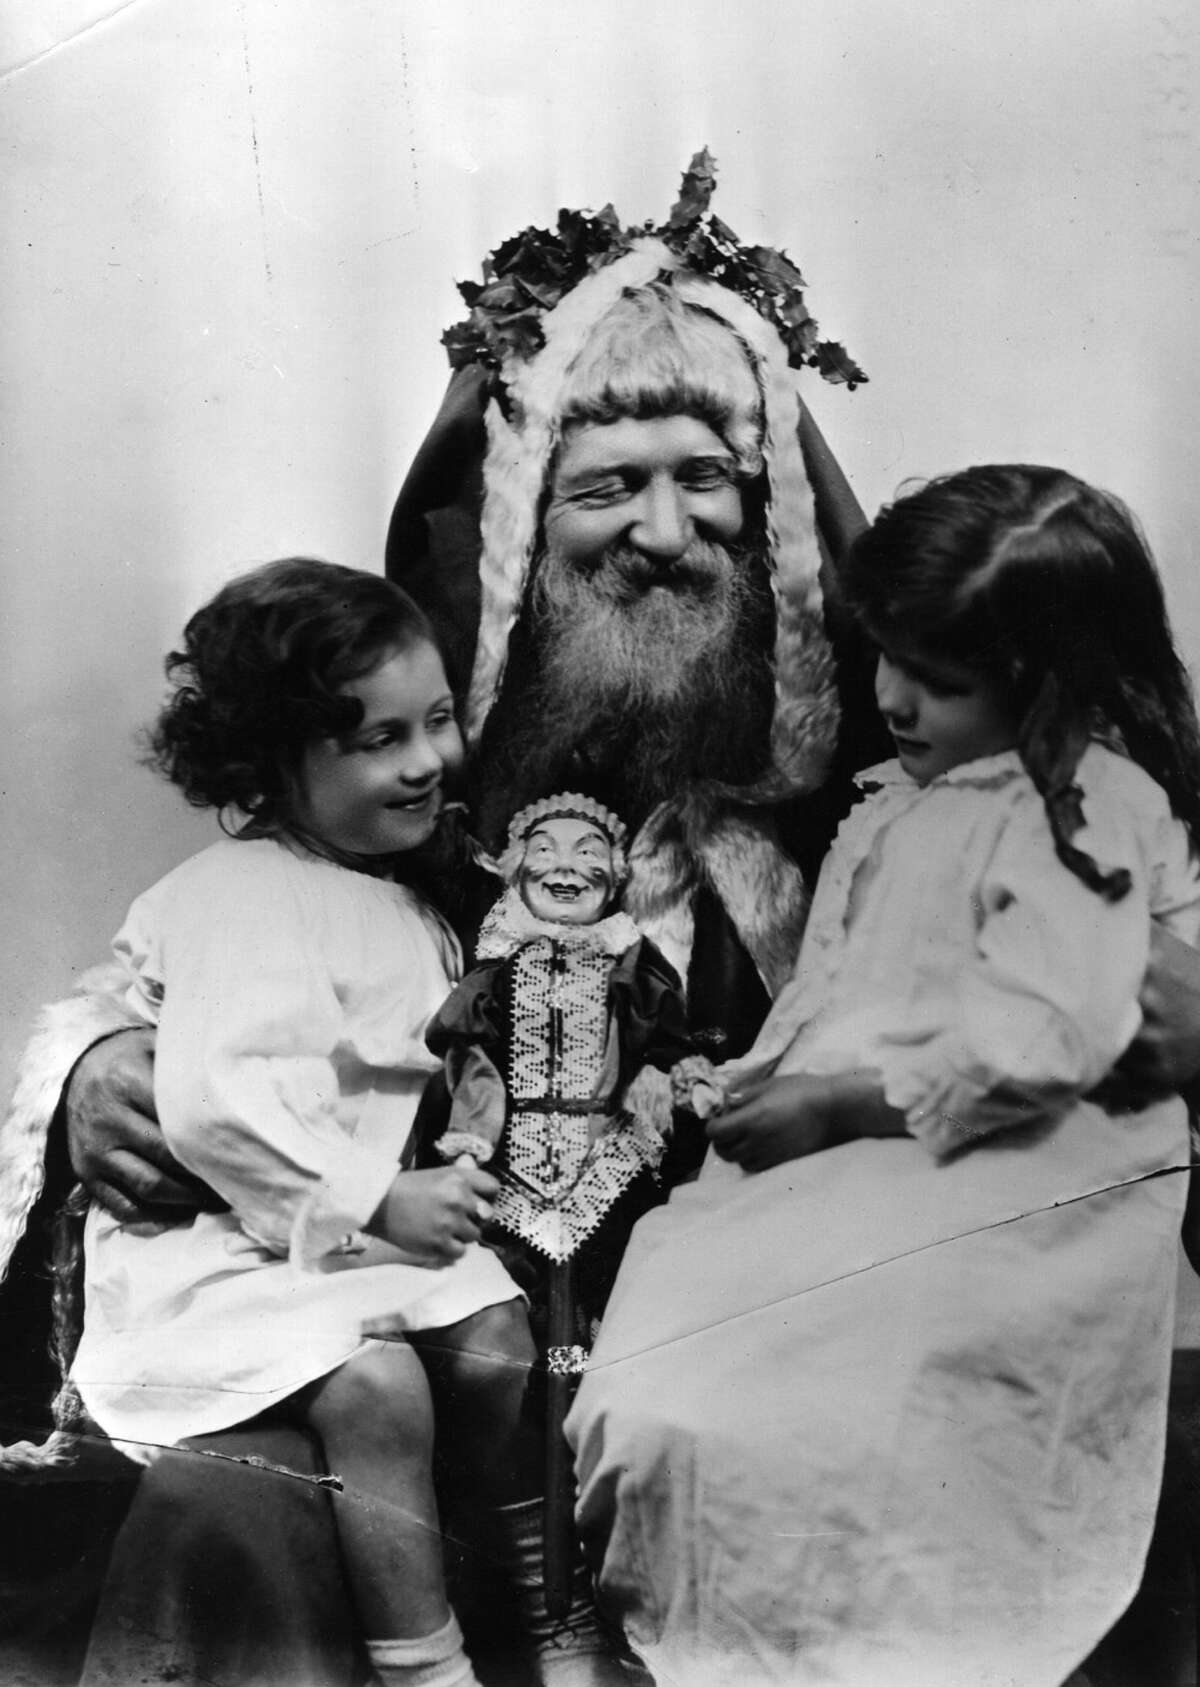 Santa Claus seems very pleased to be giving the two little girls a doll in Laplander clothes, circa 1918.